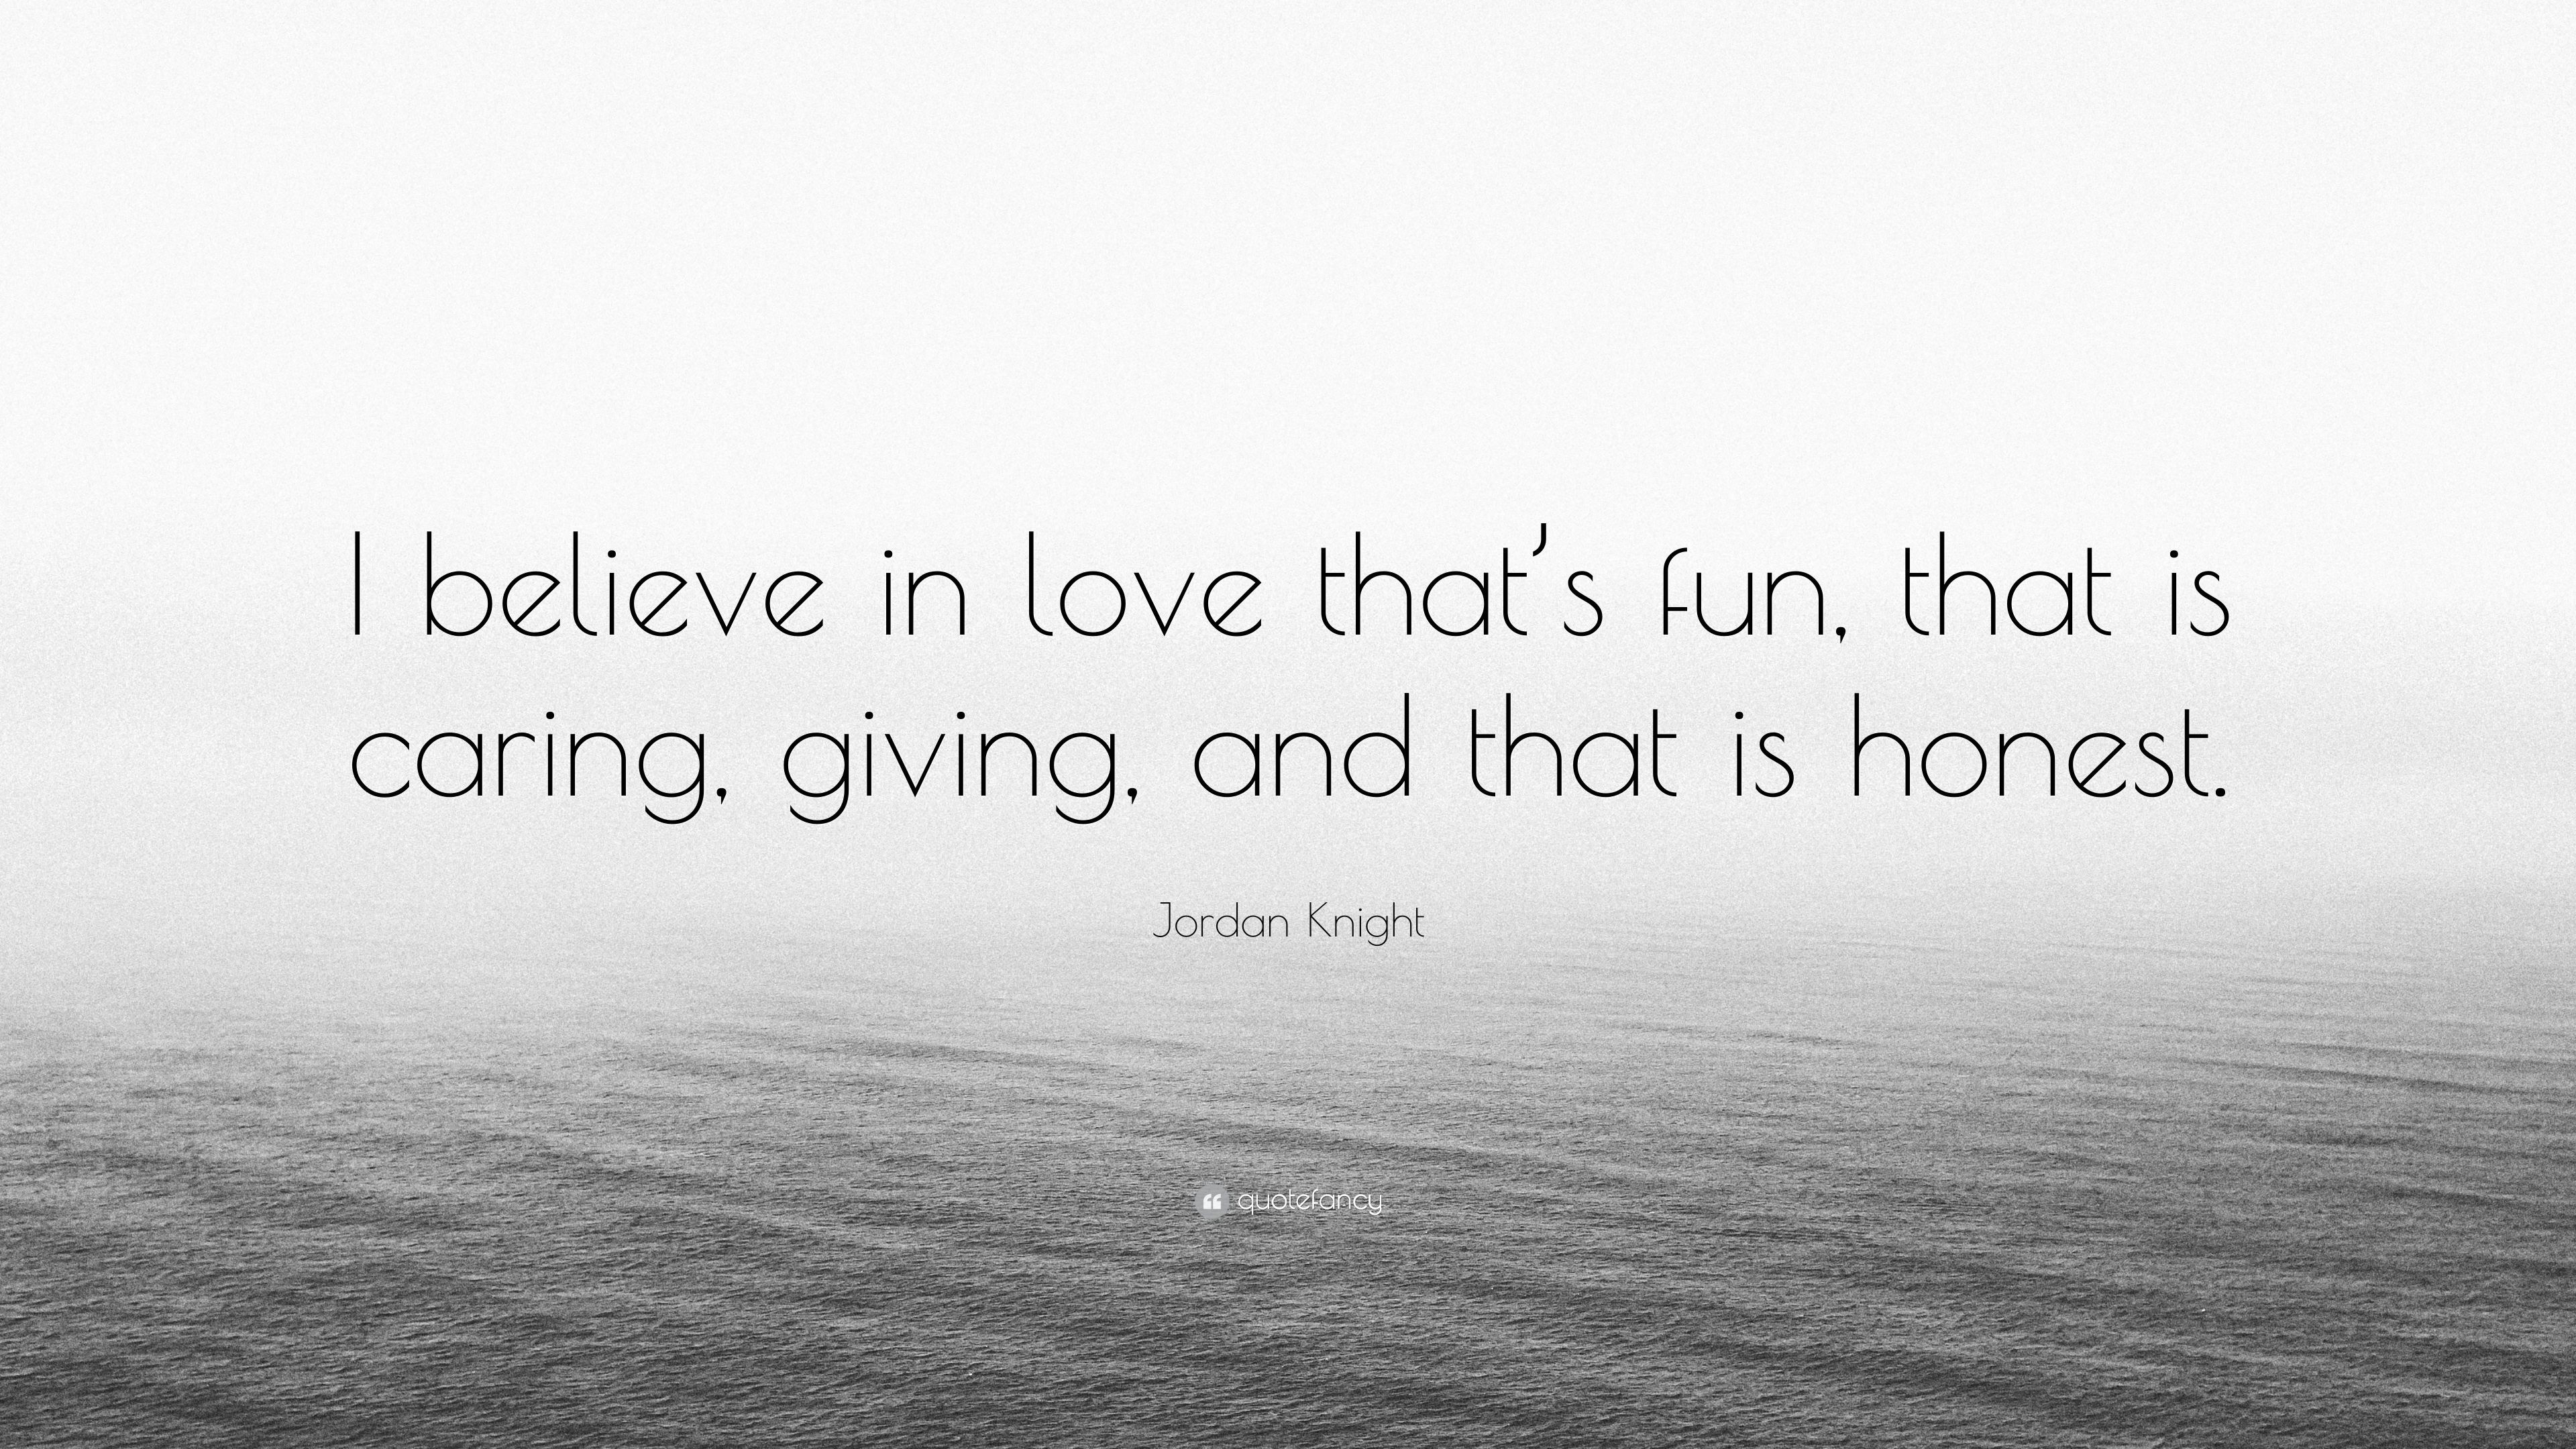 Jordan Knight Quote: “I believe in love that's fun, that is caring